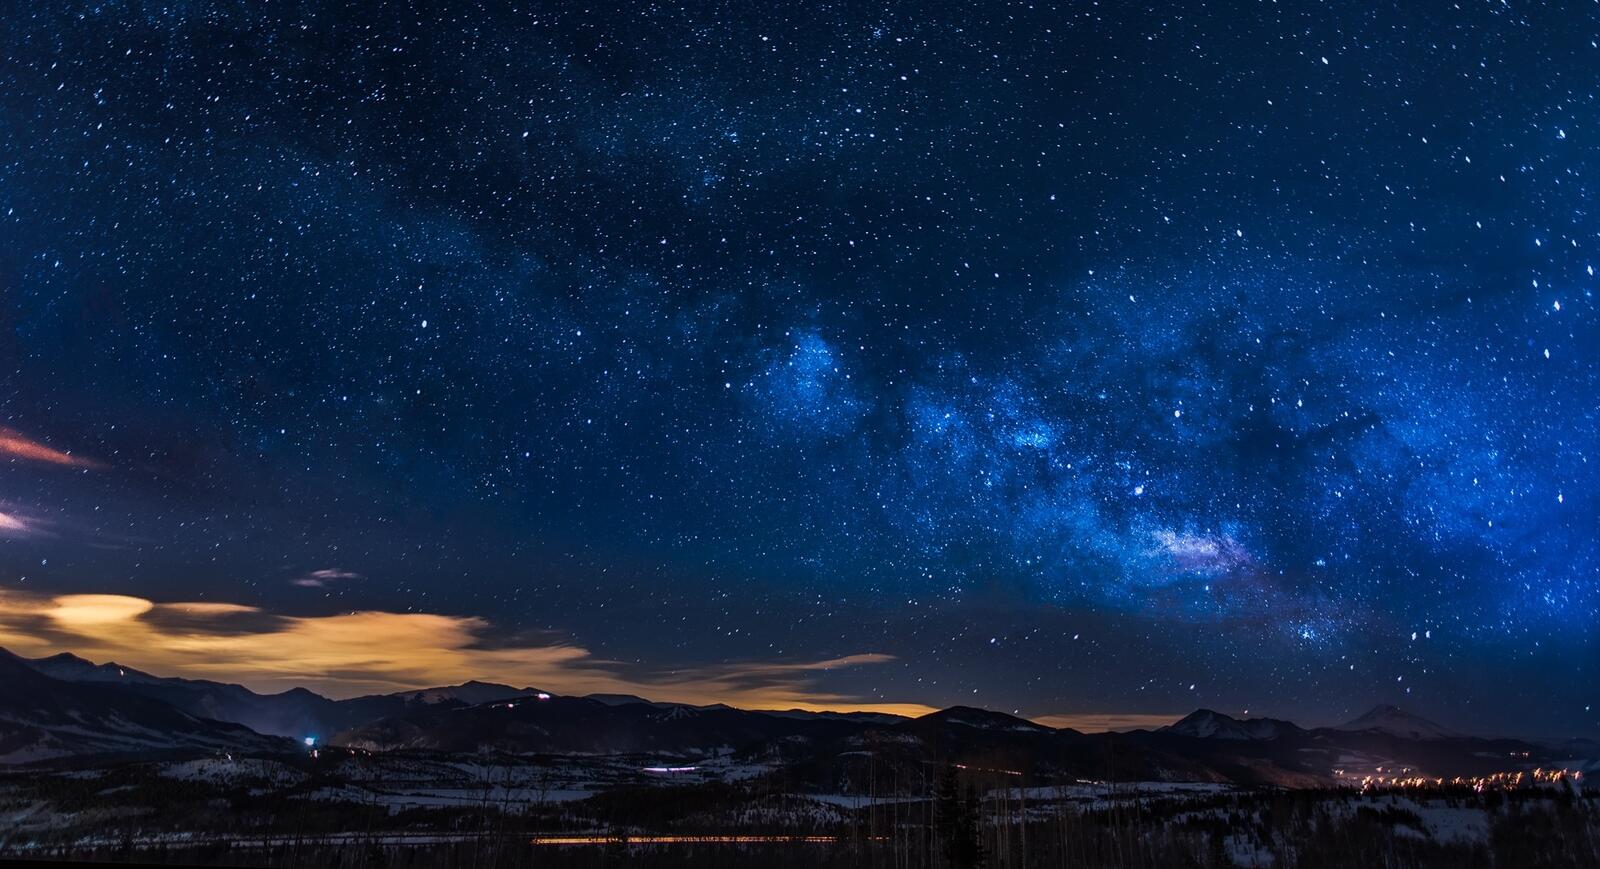 Wallpapers astronomy beautyful clouds on the desktop